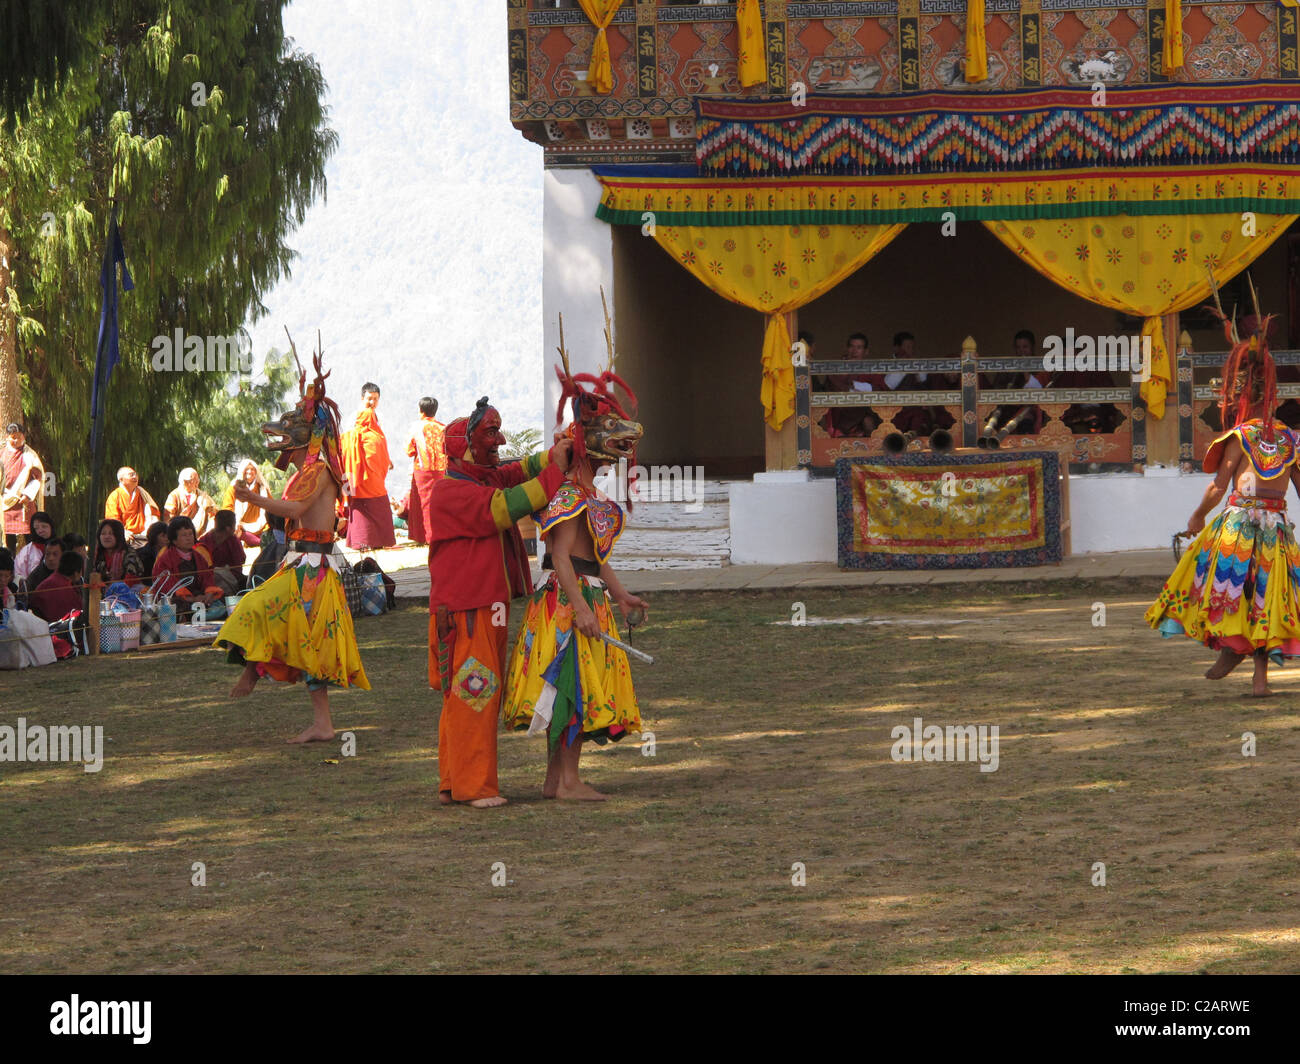 Clown helping with the mask of a dancer, Talo Festival, Bhutan Stock Photo